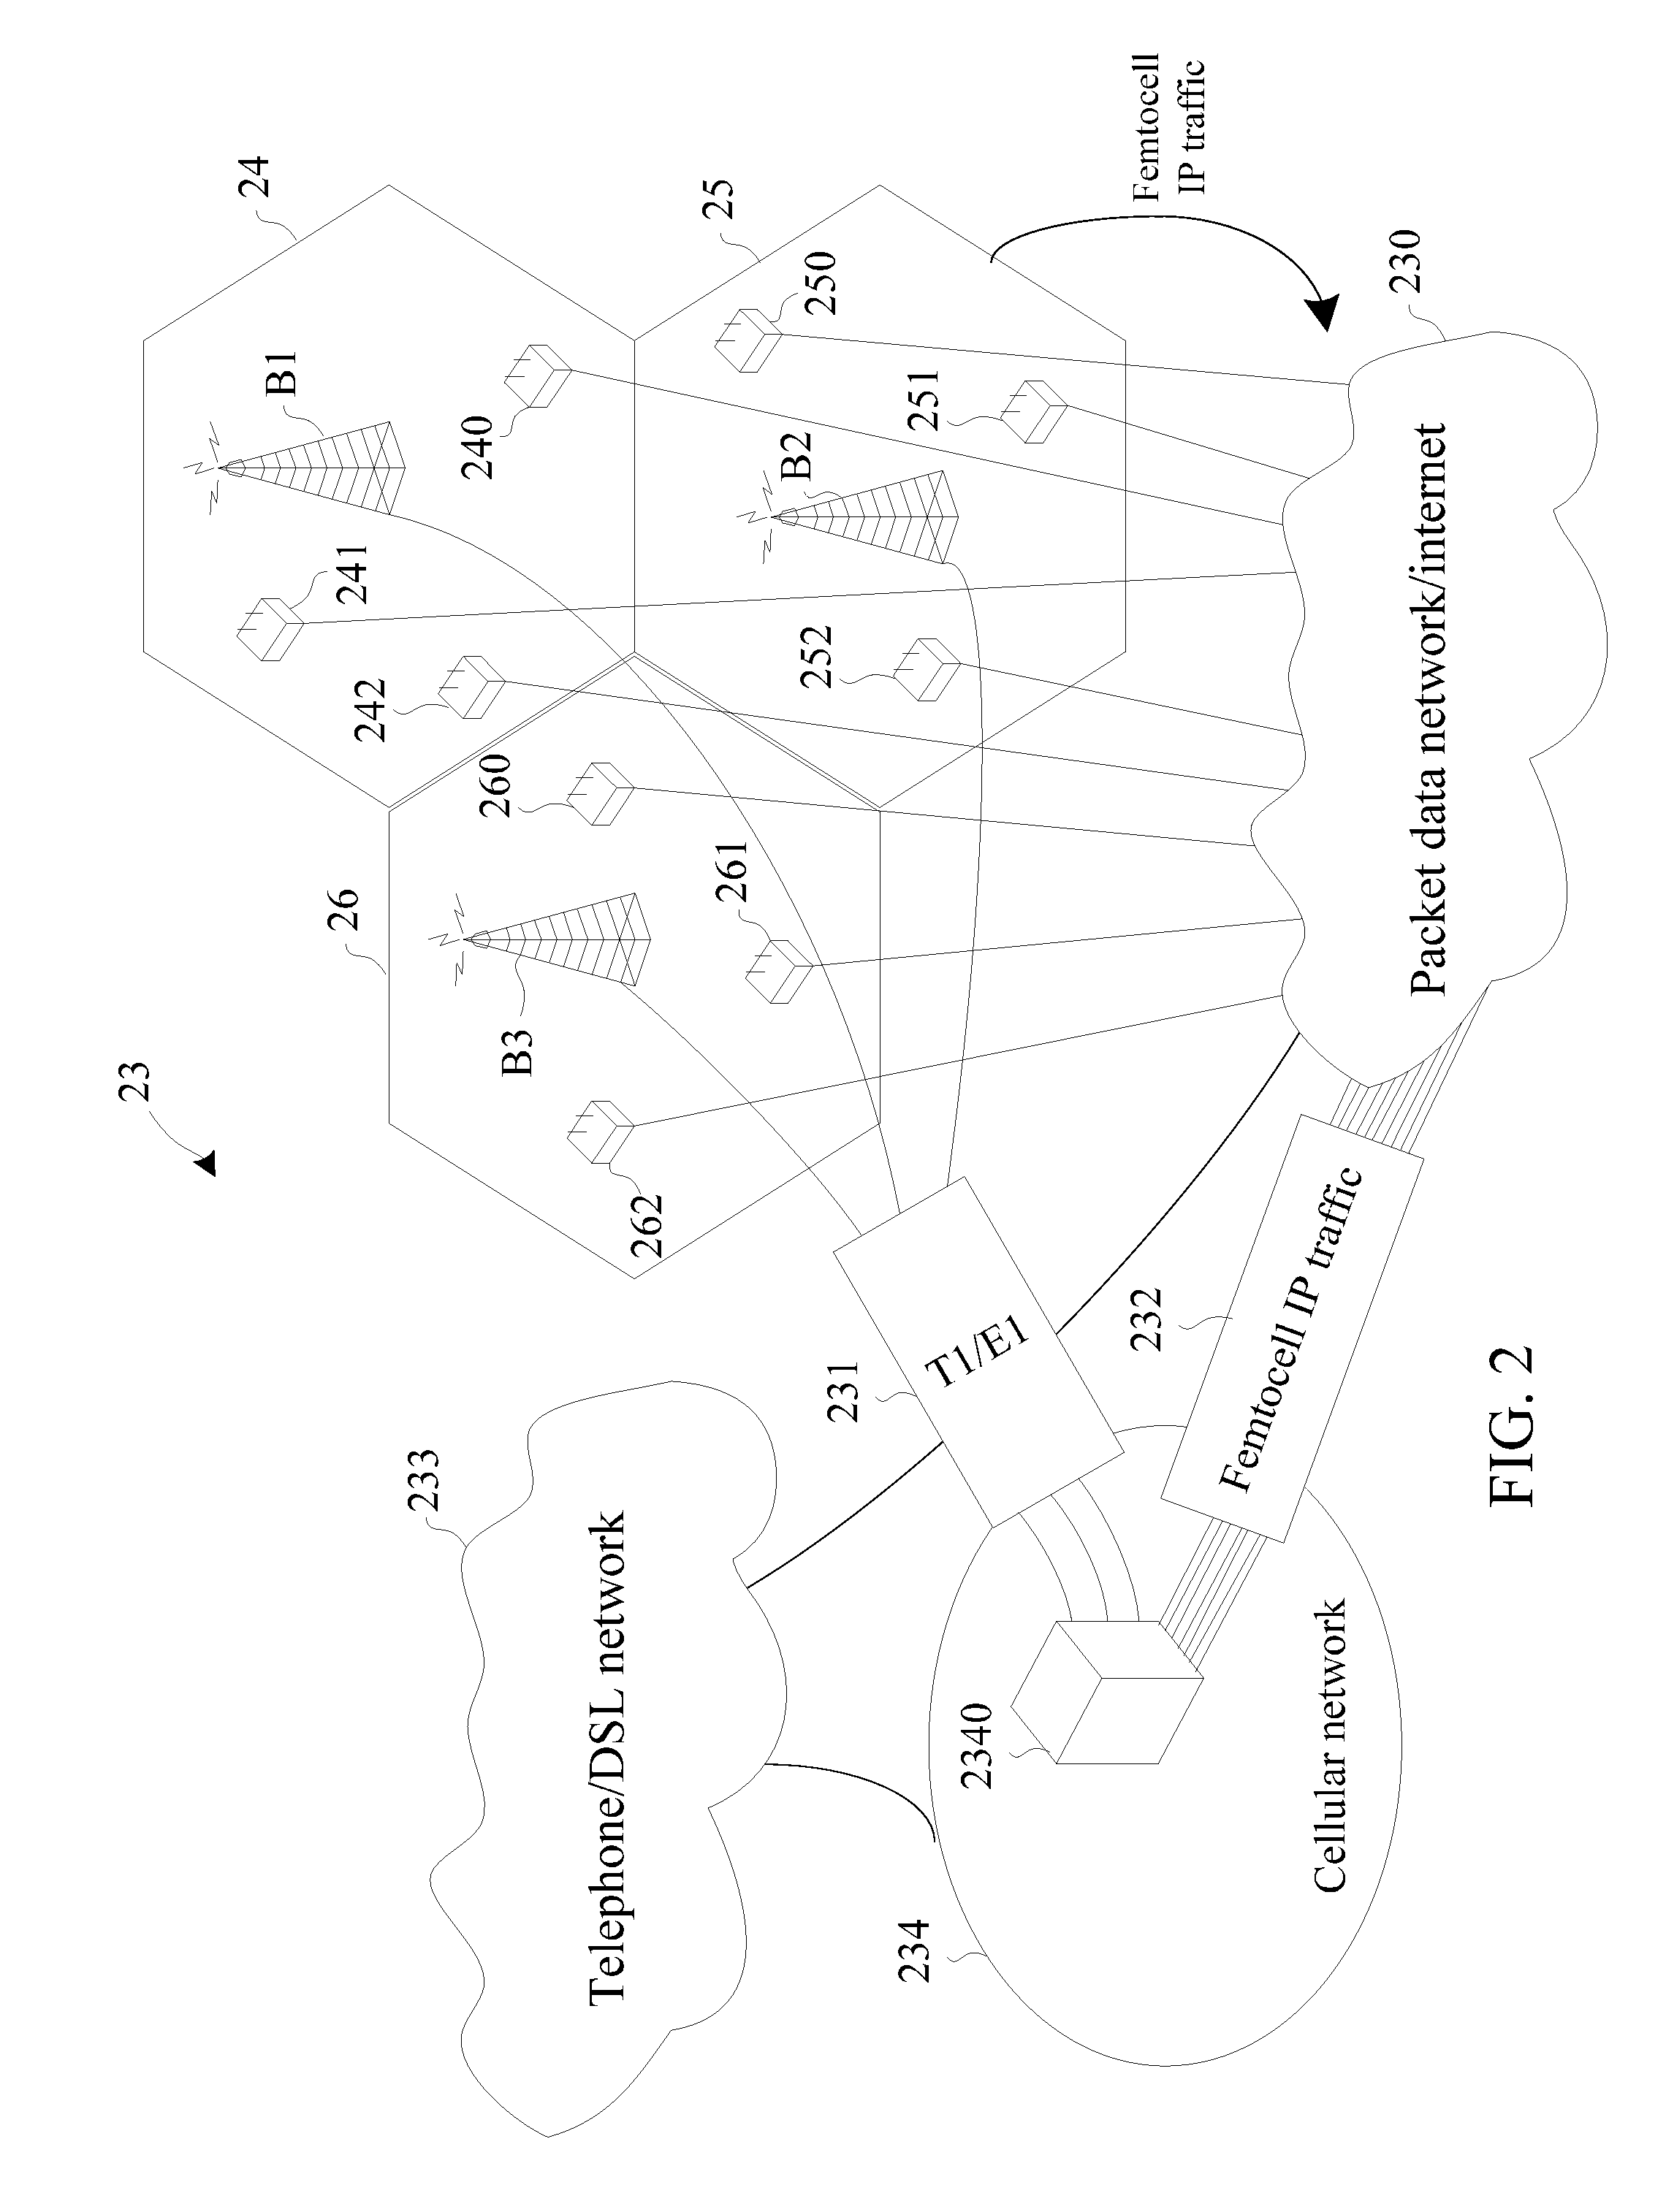 Multi-user, multi-mode baseband signaling methods, timing/frequency synchronization, and receiver architectures